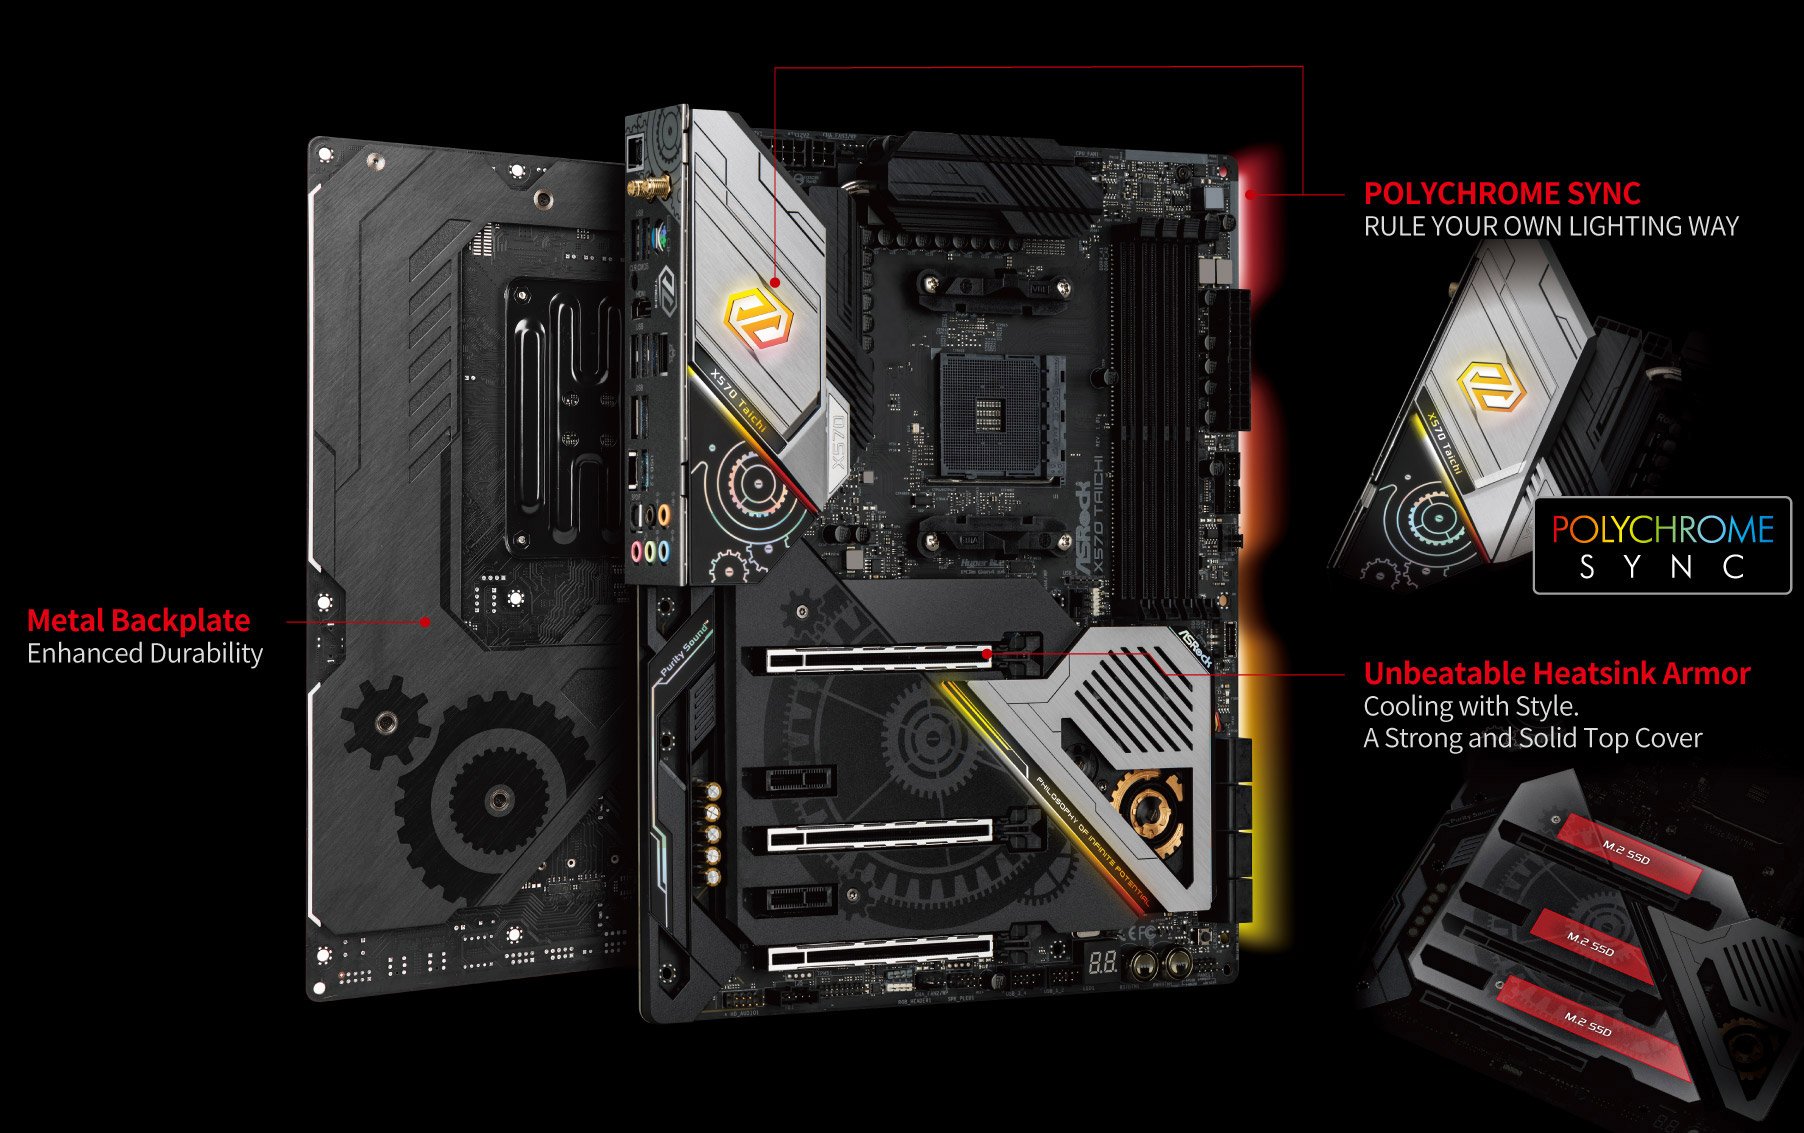 Two ASRock X570 Taichi Motherboard Back to Back along with text and graphics pointing out the following features: Metal backplate for enhanced durability, Polychrome Sync to rule your own lighting way and unbeatable heatsink armor to cool with style via this strong and solid top cover